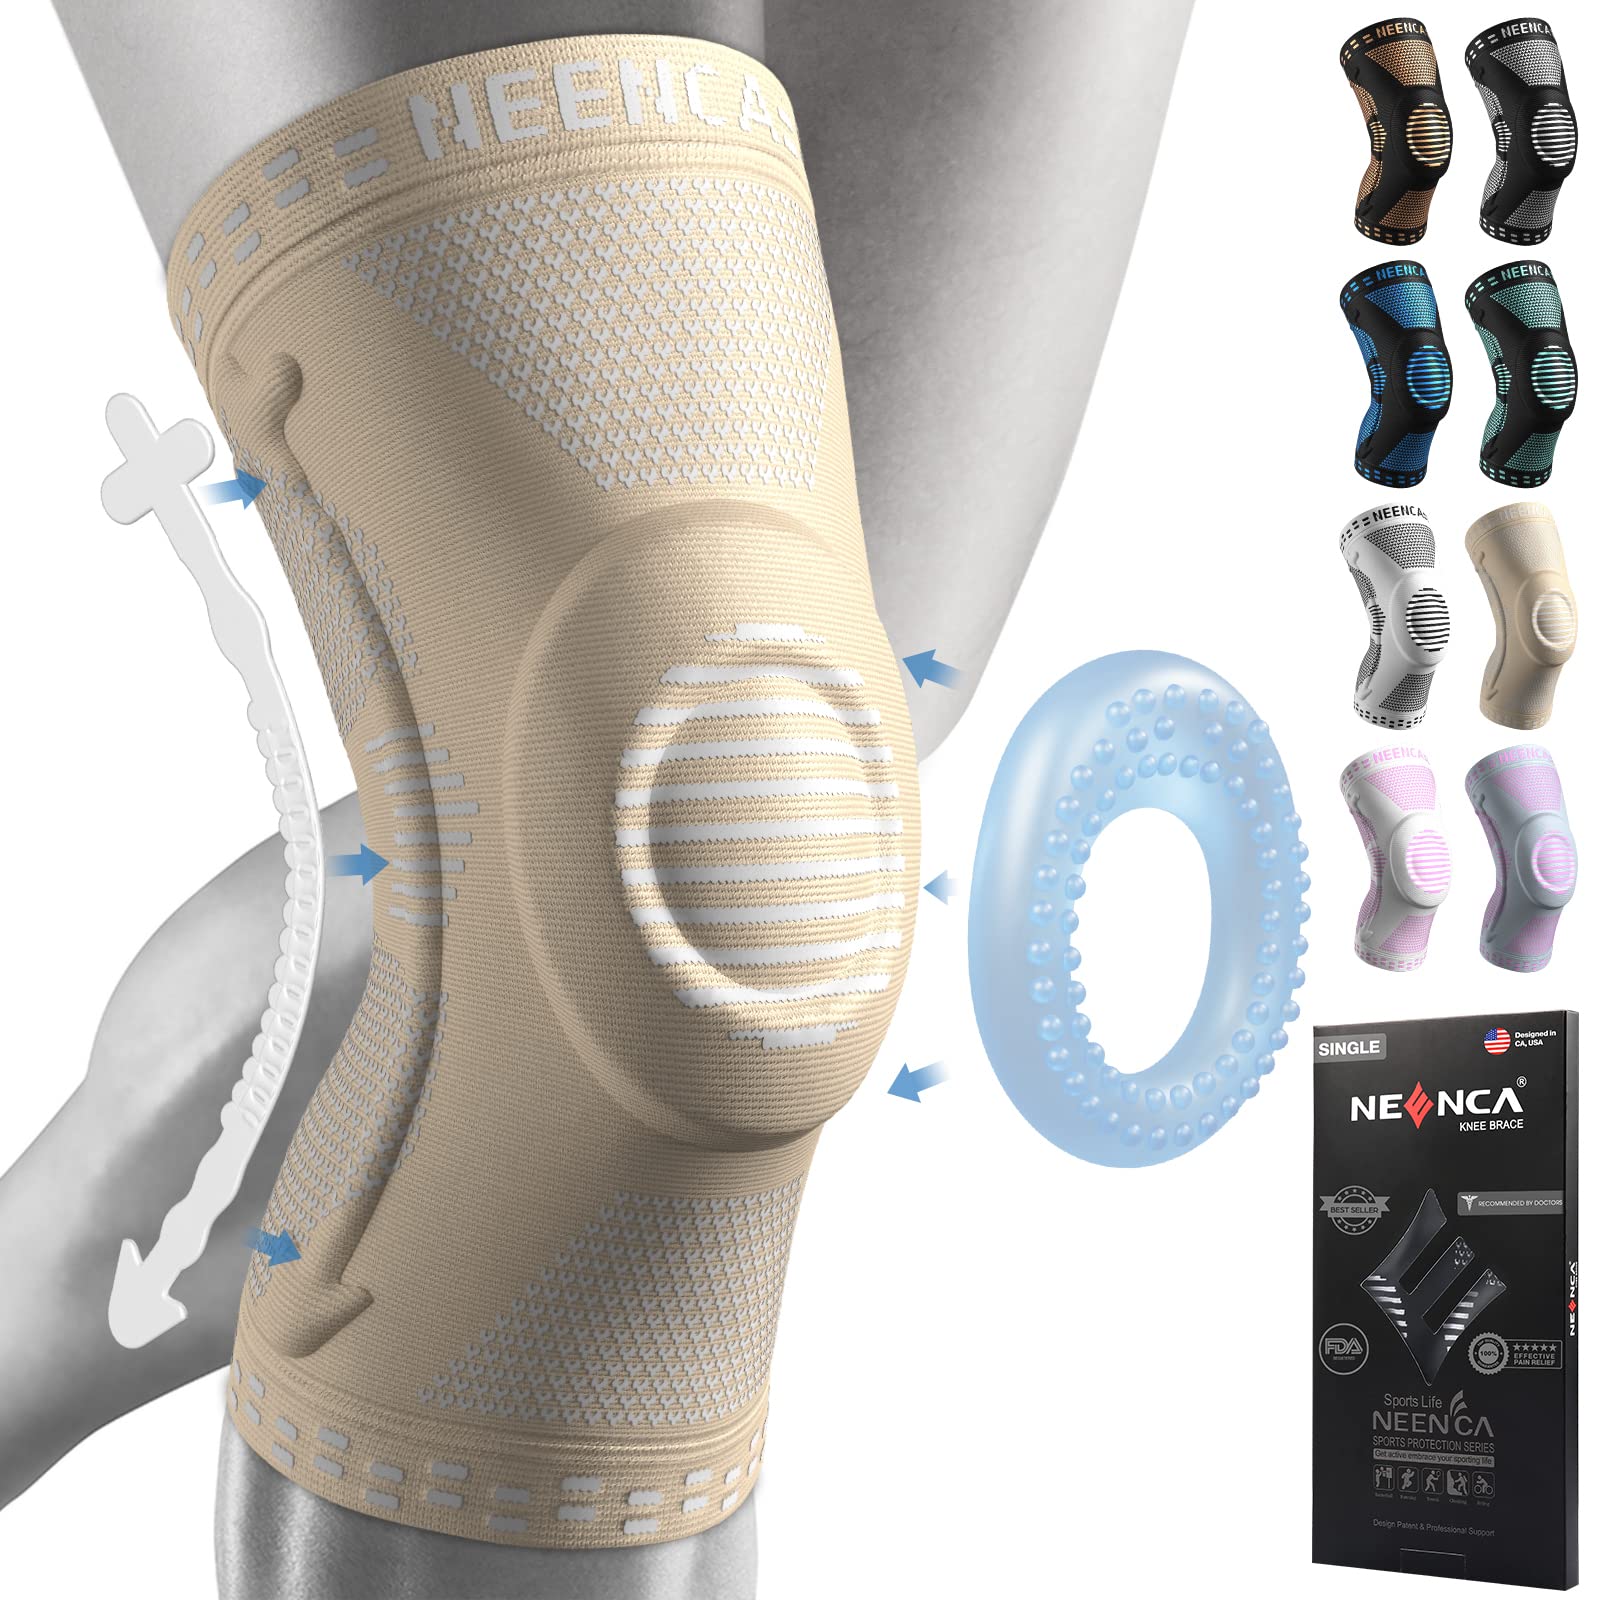 Life Brand Elastic Knee Brace With Stabilizers, Large-Xlarge, 1